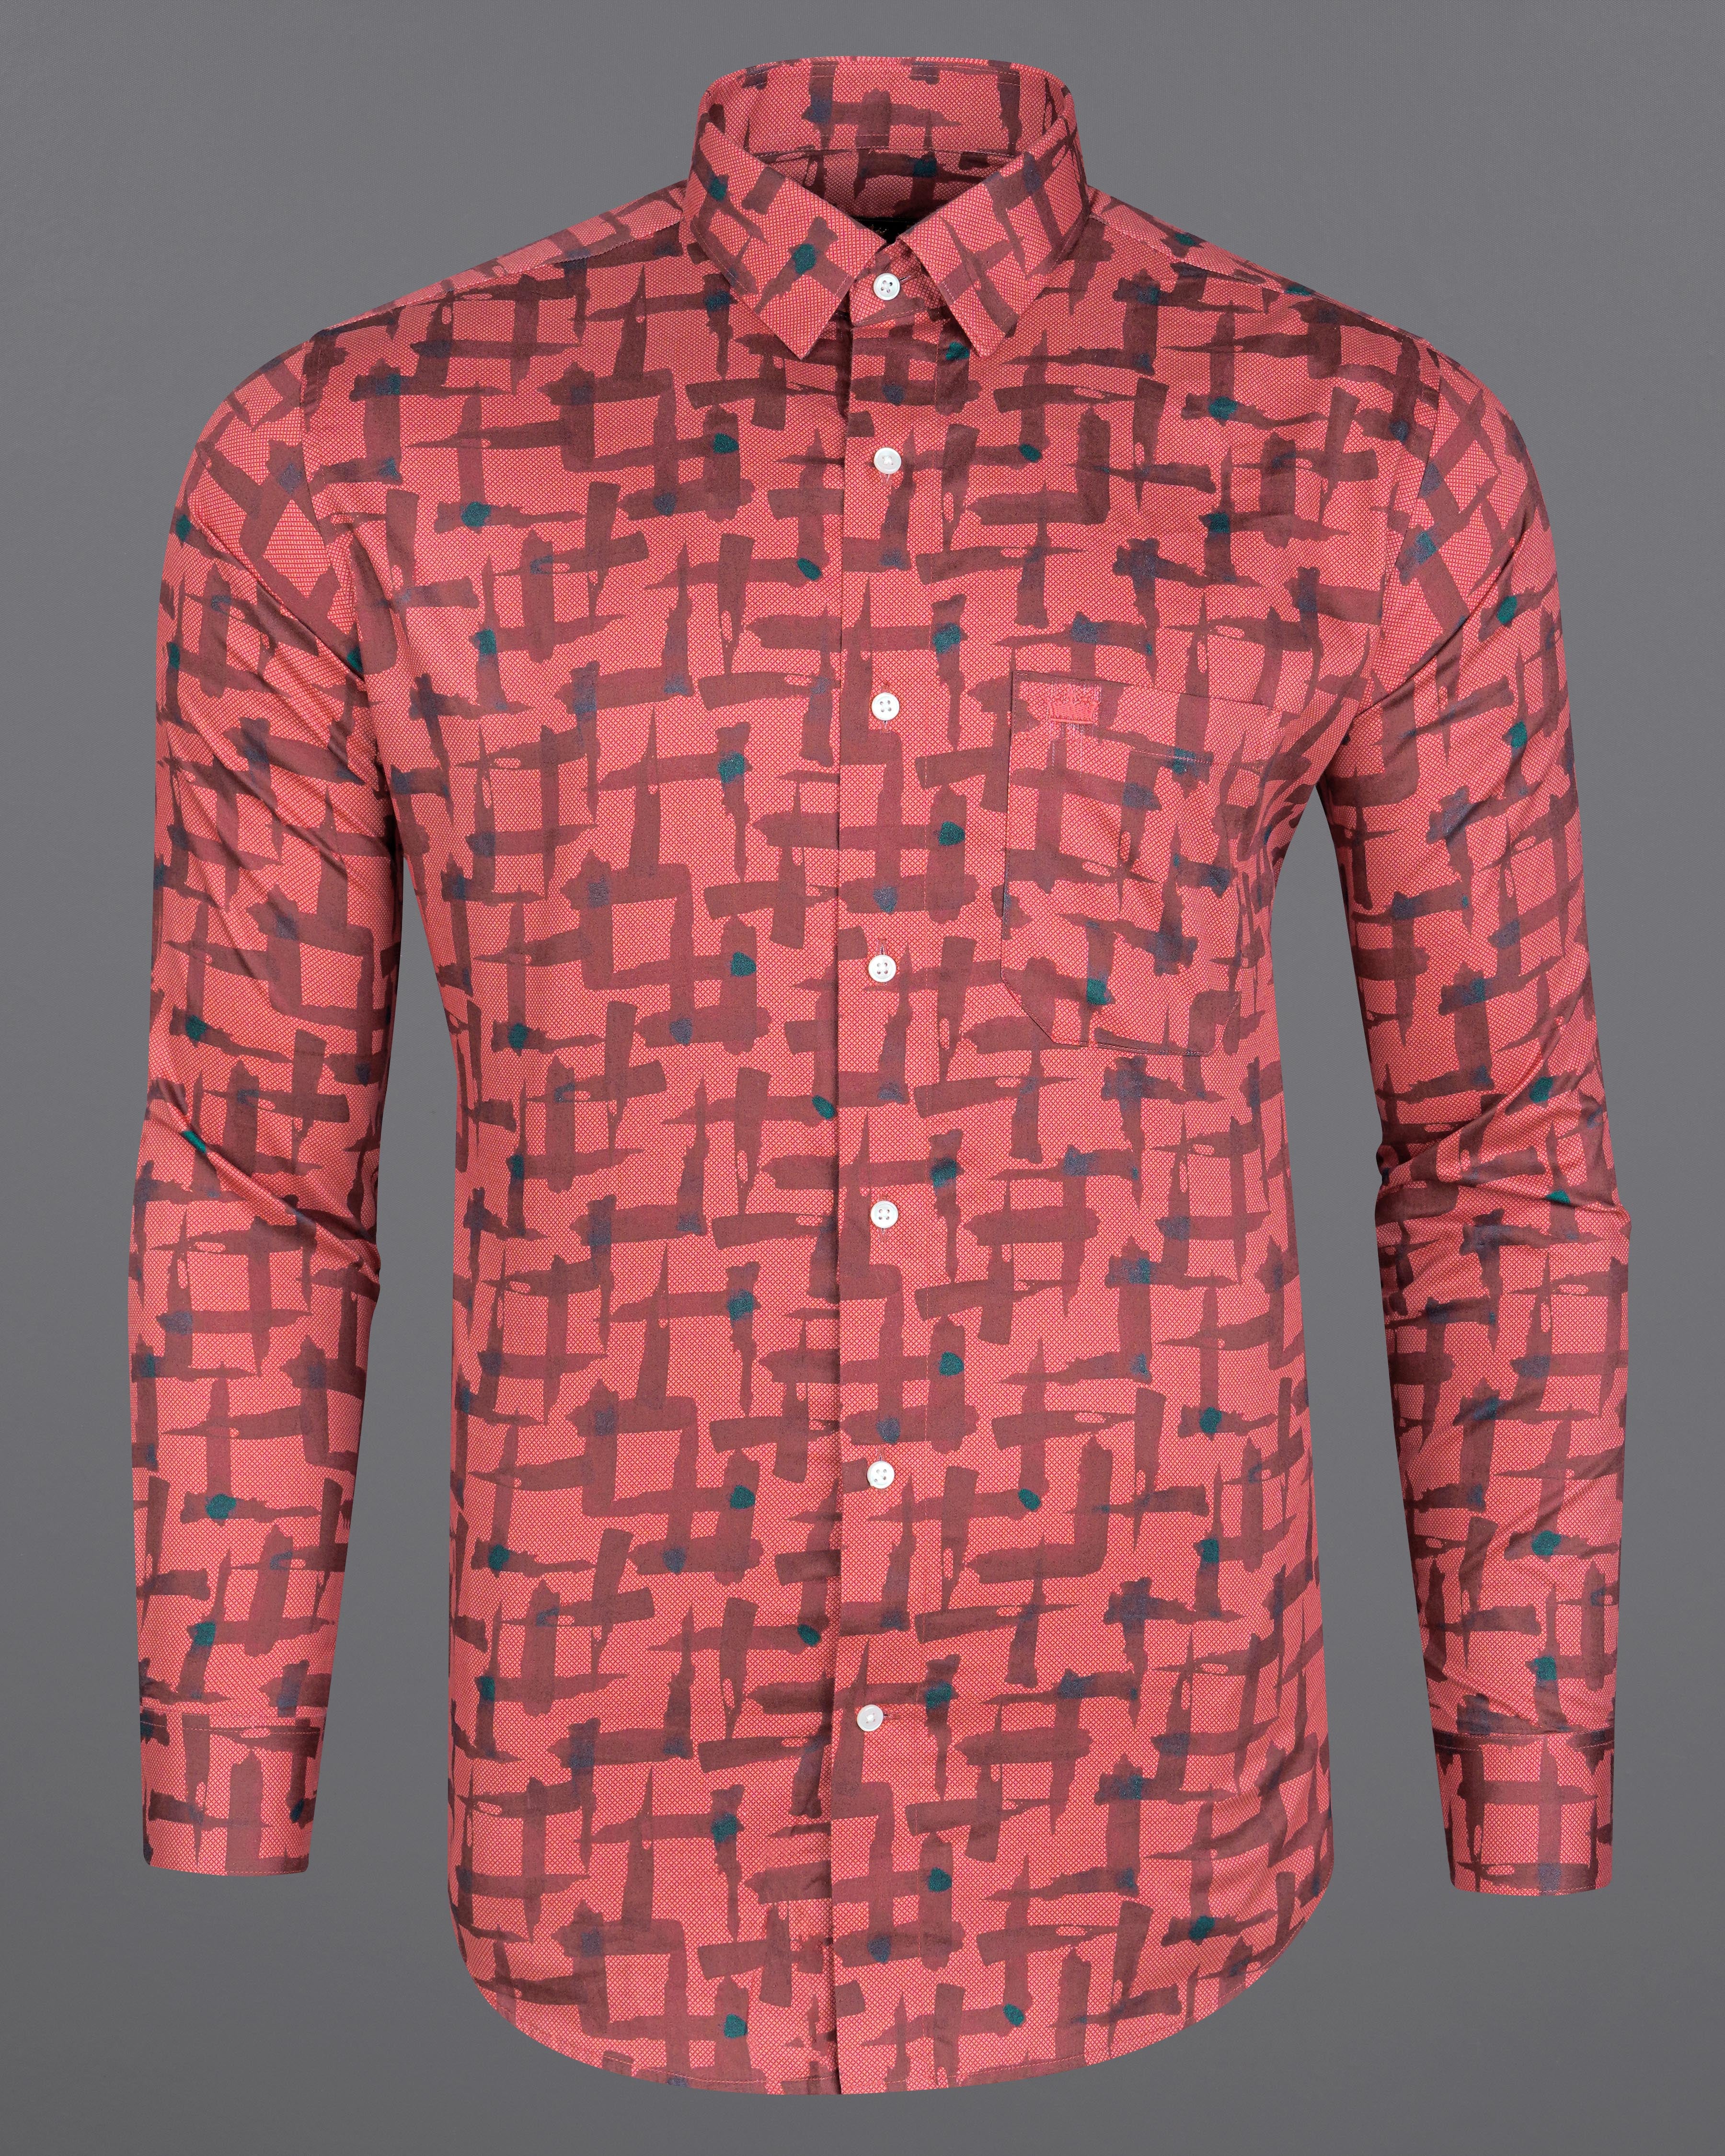 Pastel Pink with Deep Coffee Brown Abstract Printed  Super Soft Premium Cotton Shirt 8190 -38,8190 -H-38,8190 -39,8190 -H-39,8190 -40,8190 -H-40,8190 -42,8190 -H-42,8190 -44,8190 -H-44,8190 -46,8190 -H-46,8190 -48,8190 -H-48,8190 -50,8190 -H-50,8190 -52,8190 -H-52